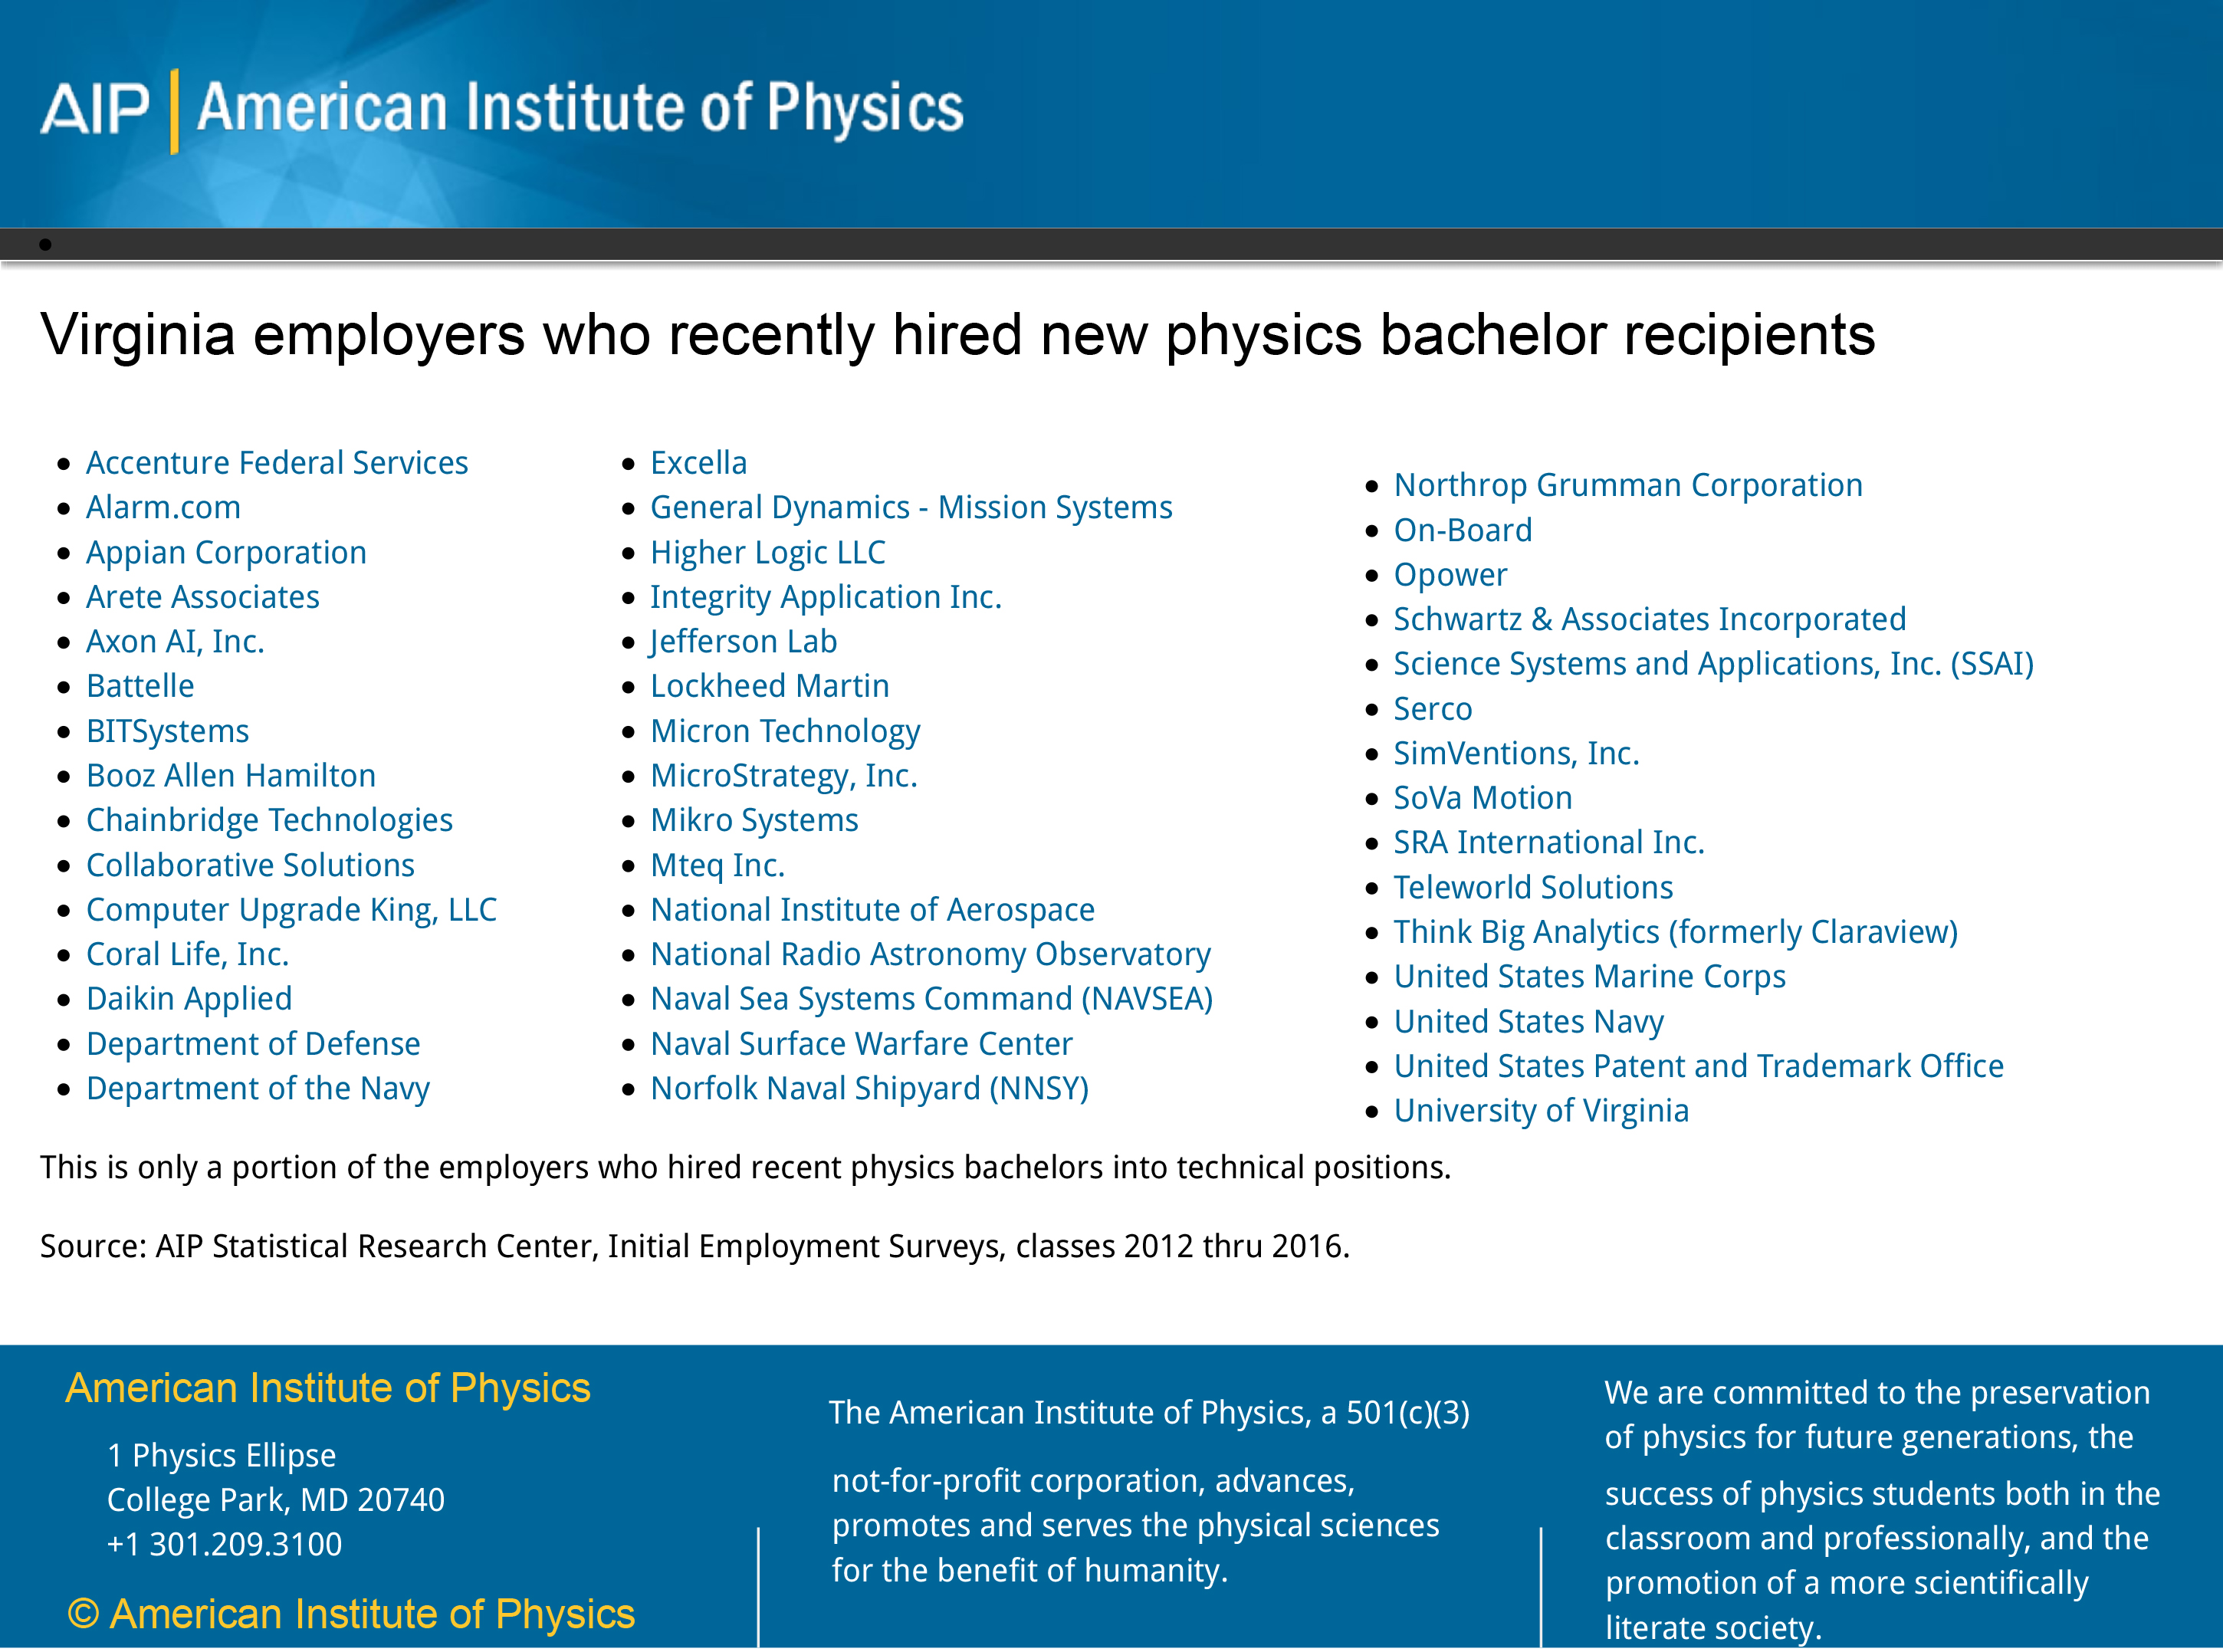 Initial Outcomes of Physics Bachelors Employment